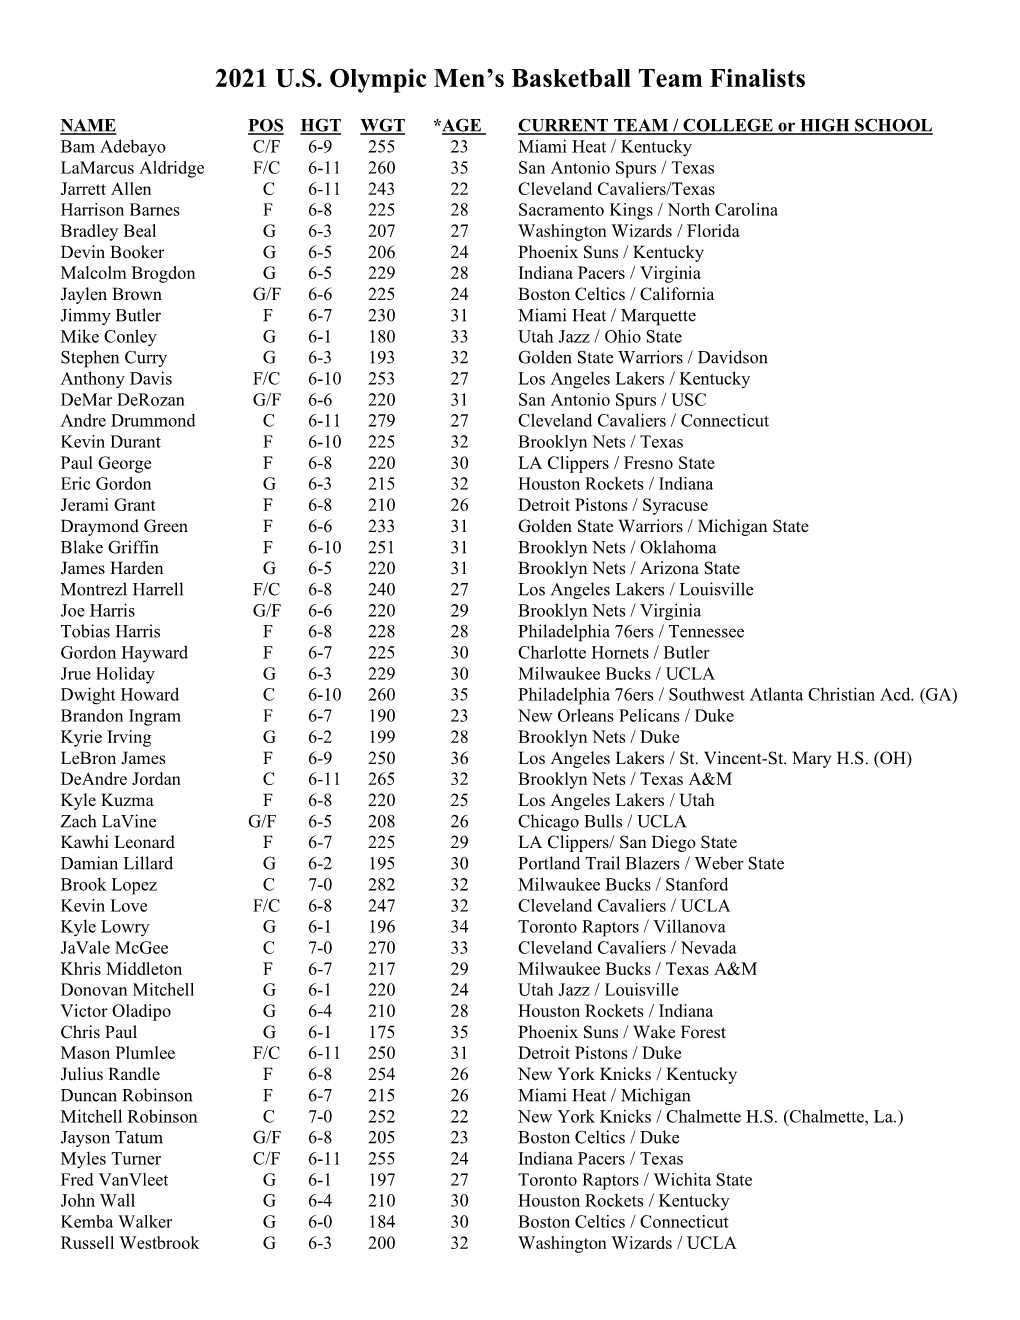 2021 MNT Finalists Roster